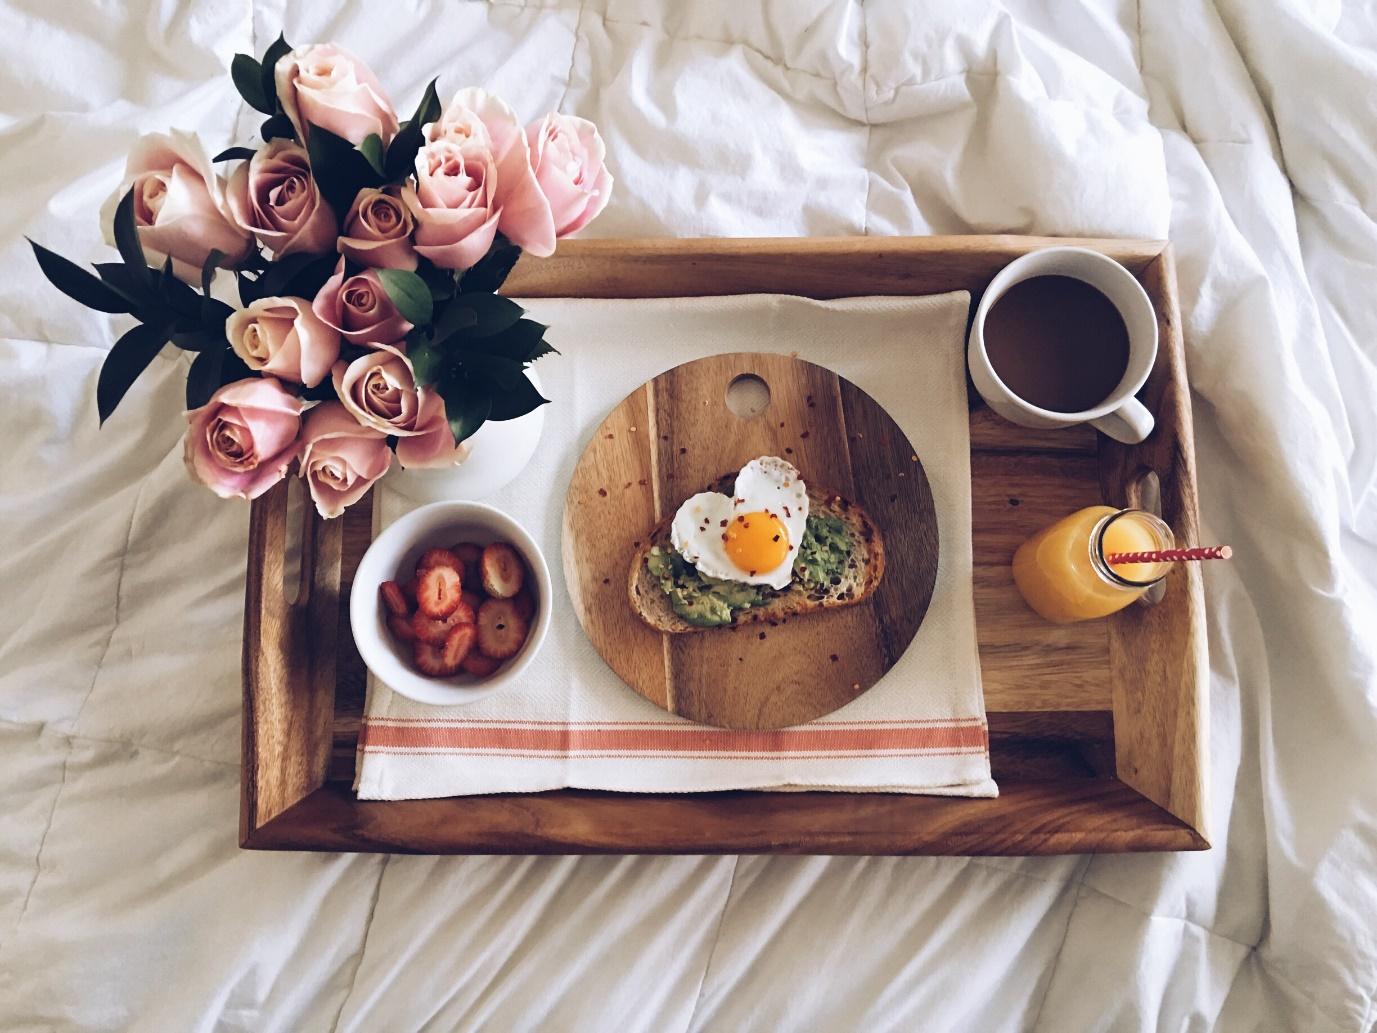 A wooden tray for breakfast in bed along with flowers and a heart shaped egg | Wedifys